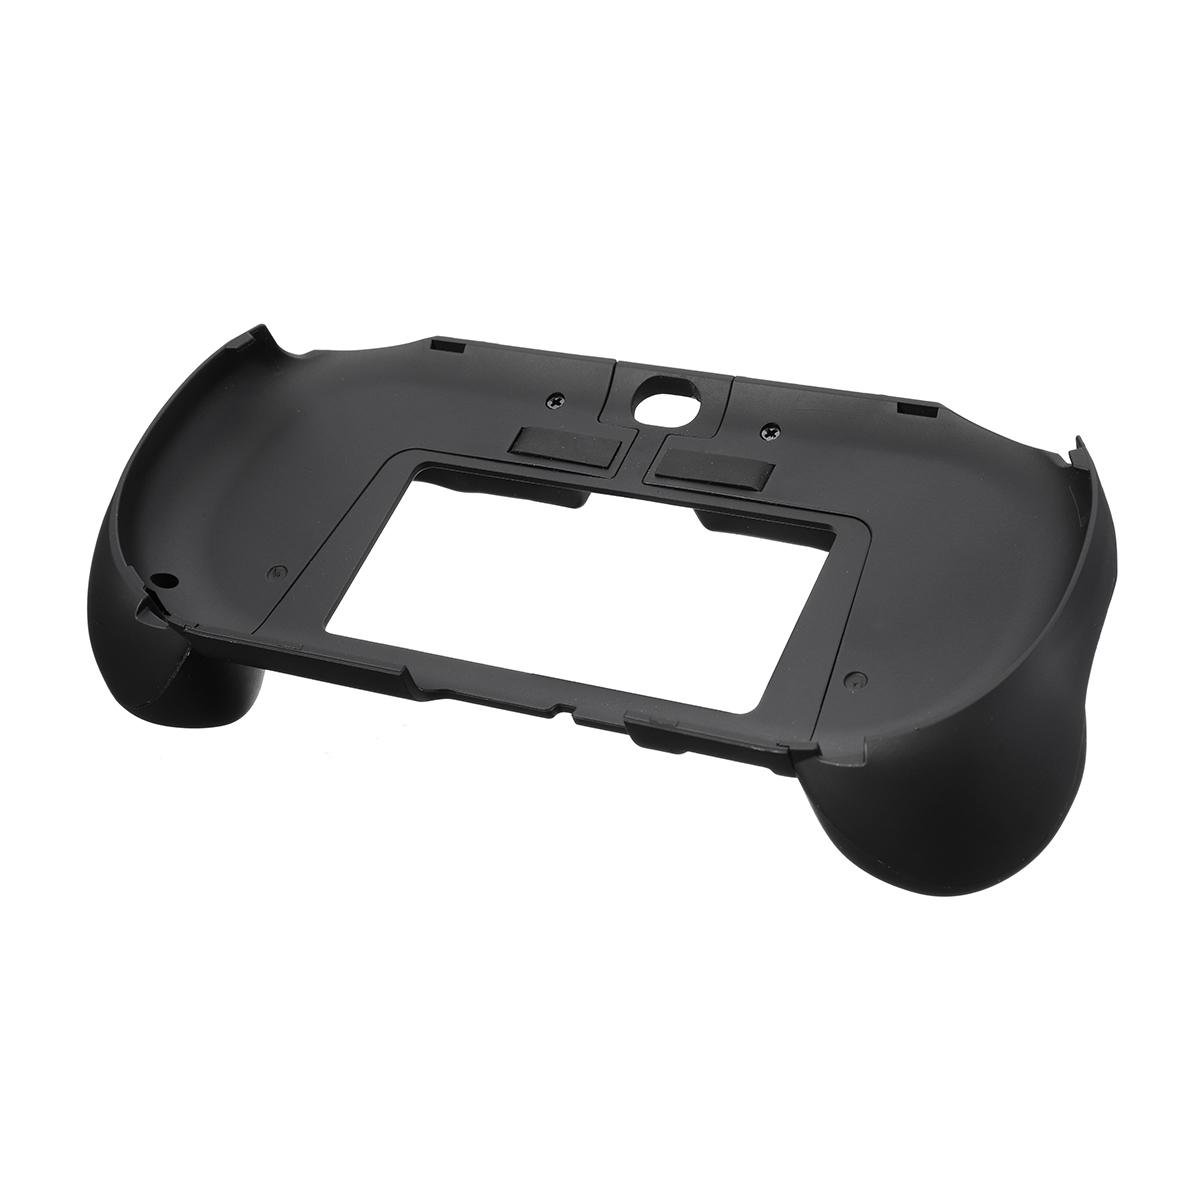 L2 R2 Trigger Grips Handle Shell Protective Case for Sony PlayStation PS Vita 2000 Game Console 5